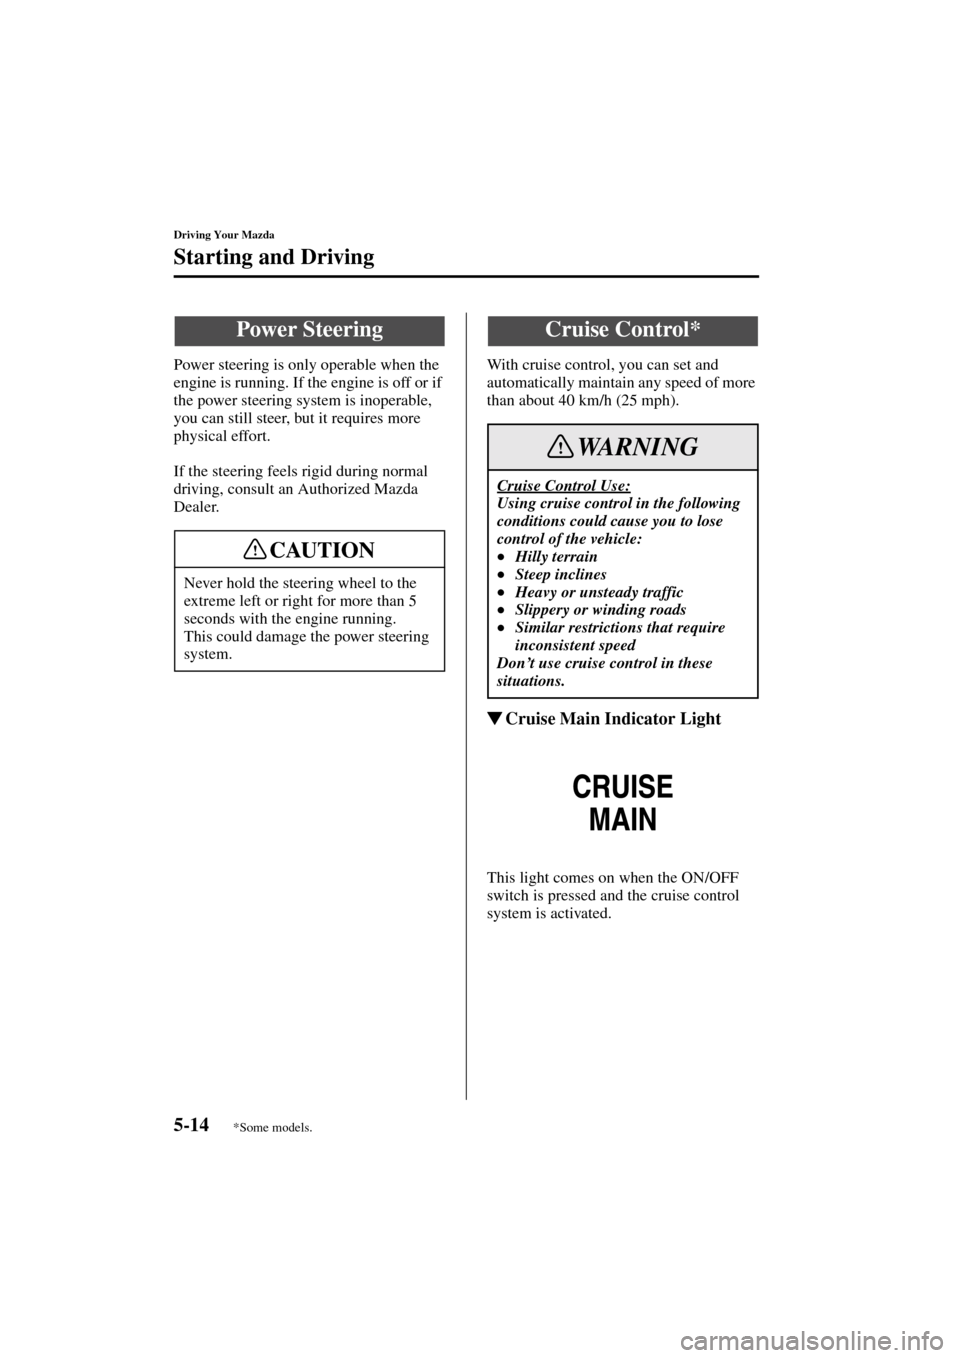 MAZDA MODEL MPV 2004  Owners Manual (in English) 5-14
Driving Your Mazda
Starting and Driving
Form No. 8S06-EA-03H
Power steering is only operable when the 
engine is running. If the engine is off or if 
the power steering system is inoperable, 
you